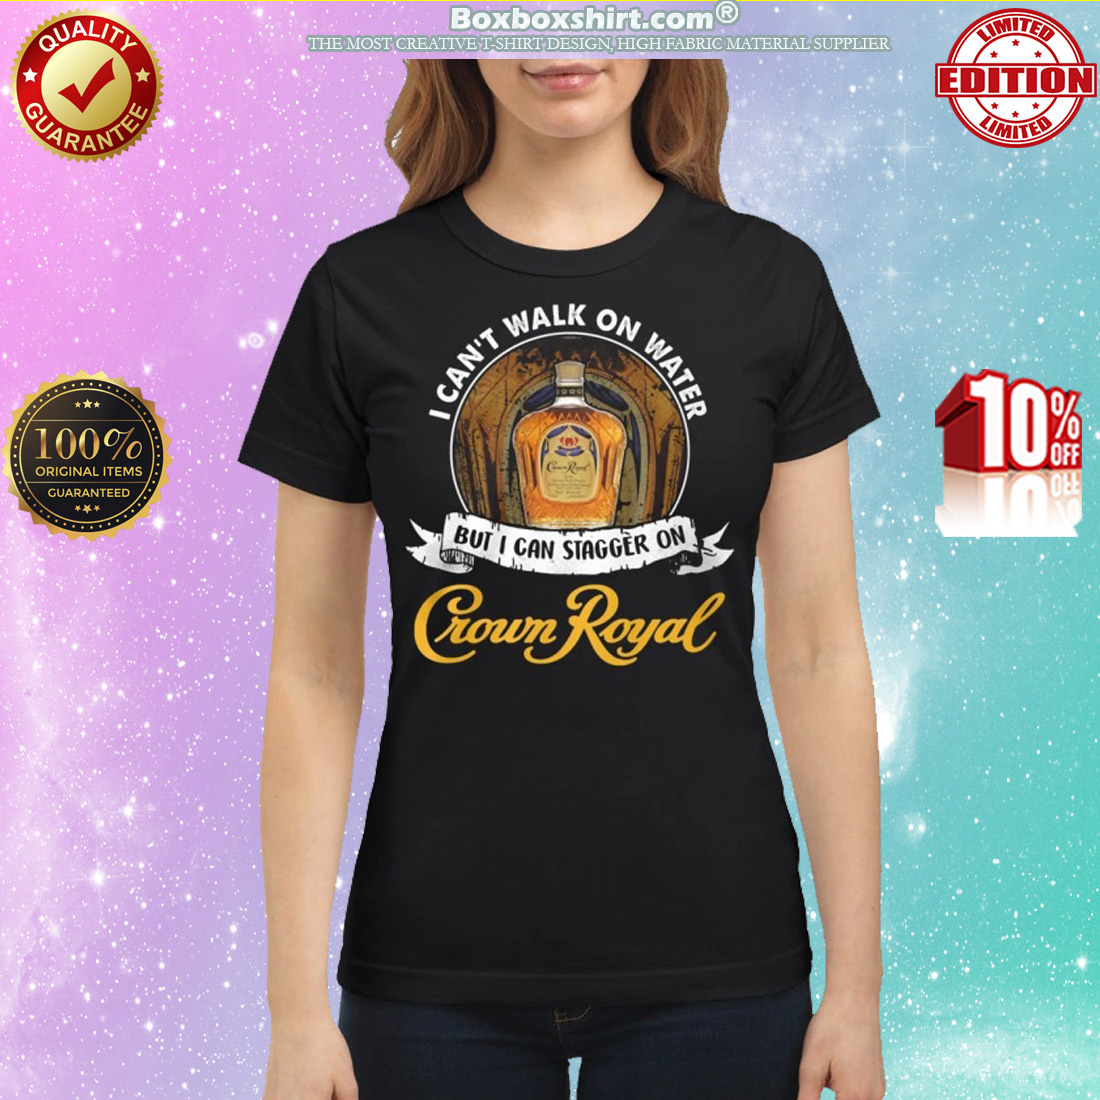 I can't not walk on water but I can stagger on Crown Royal classic shirt